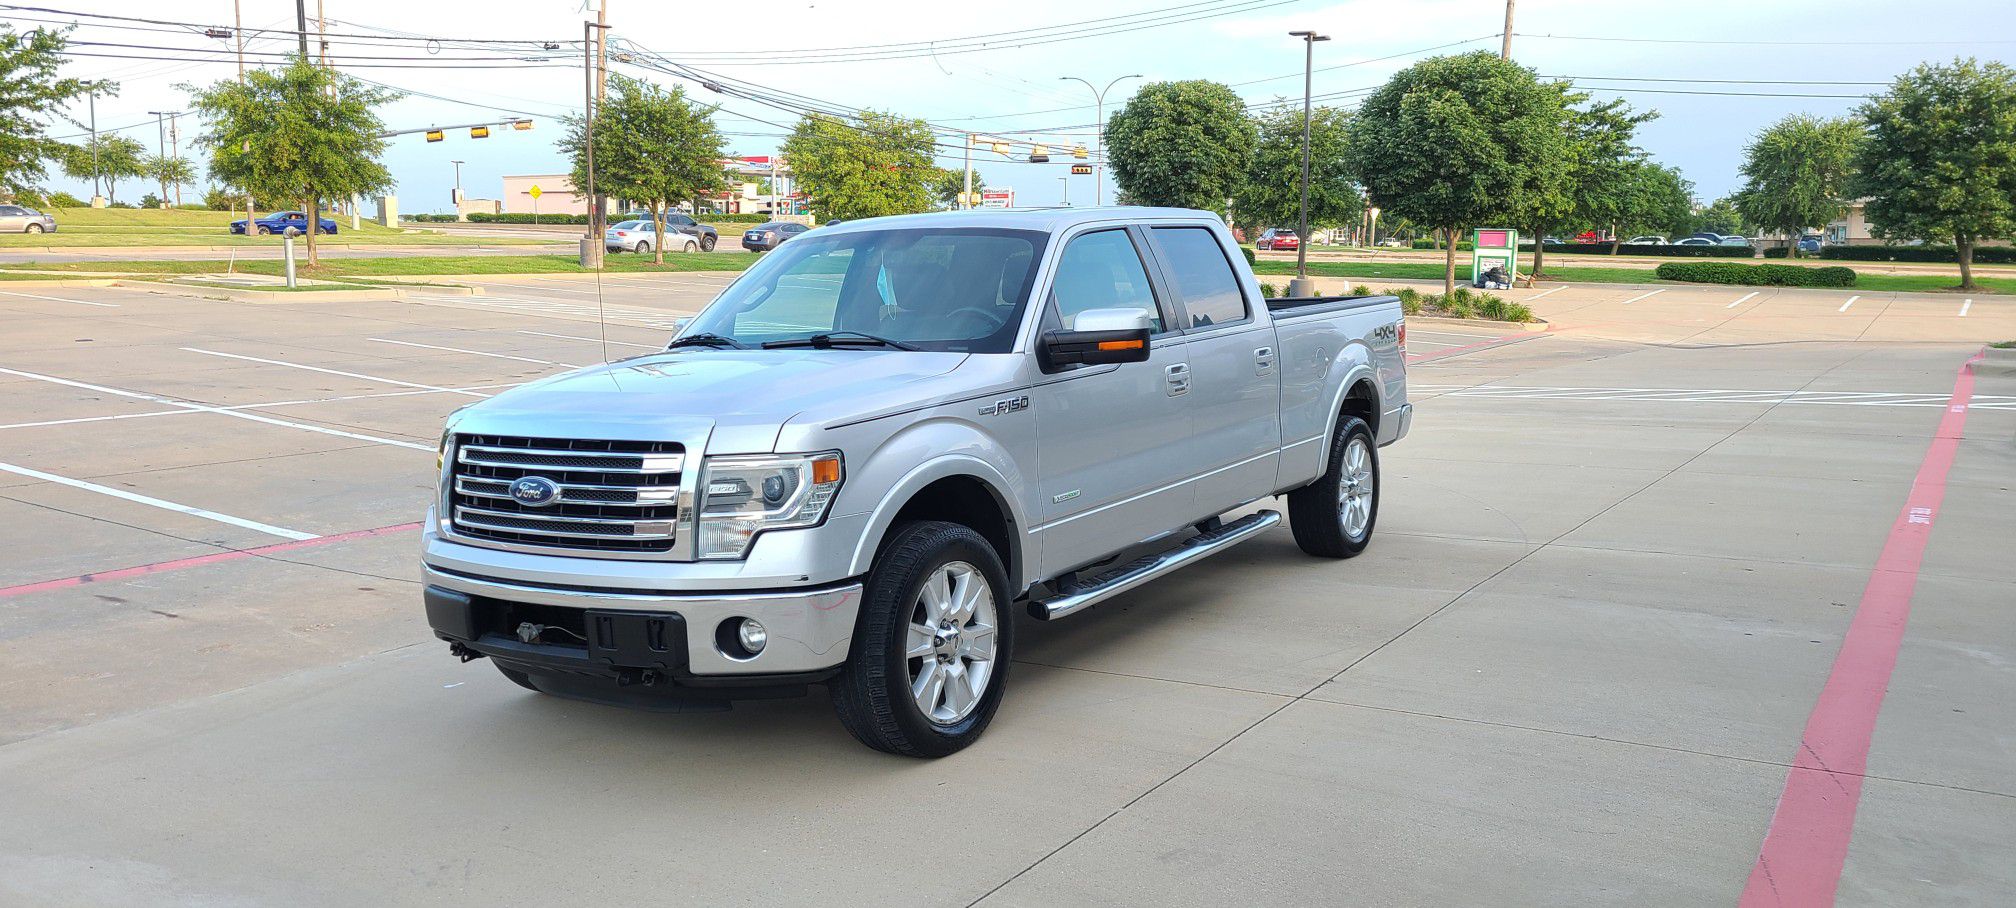 2013 FORD F150 LARIAT 4X4 CLEAN TITLE